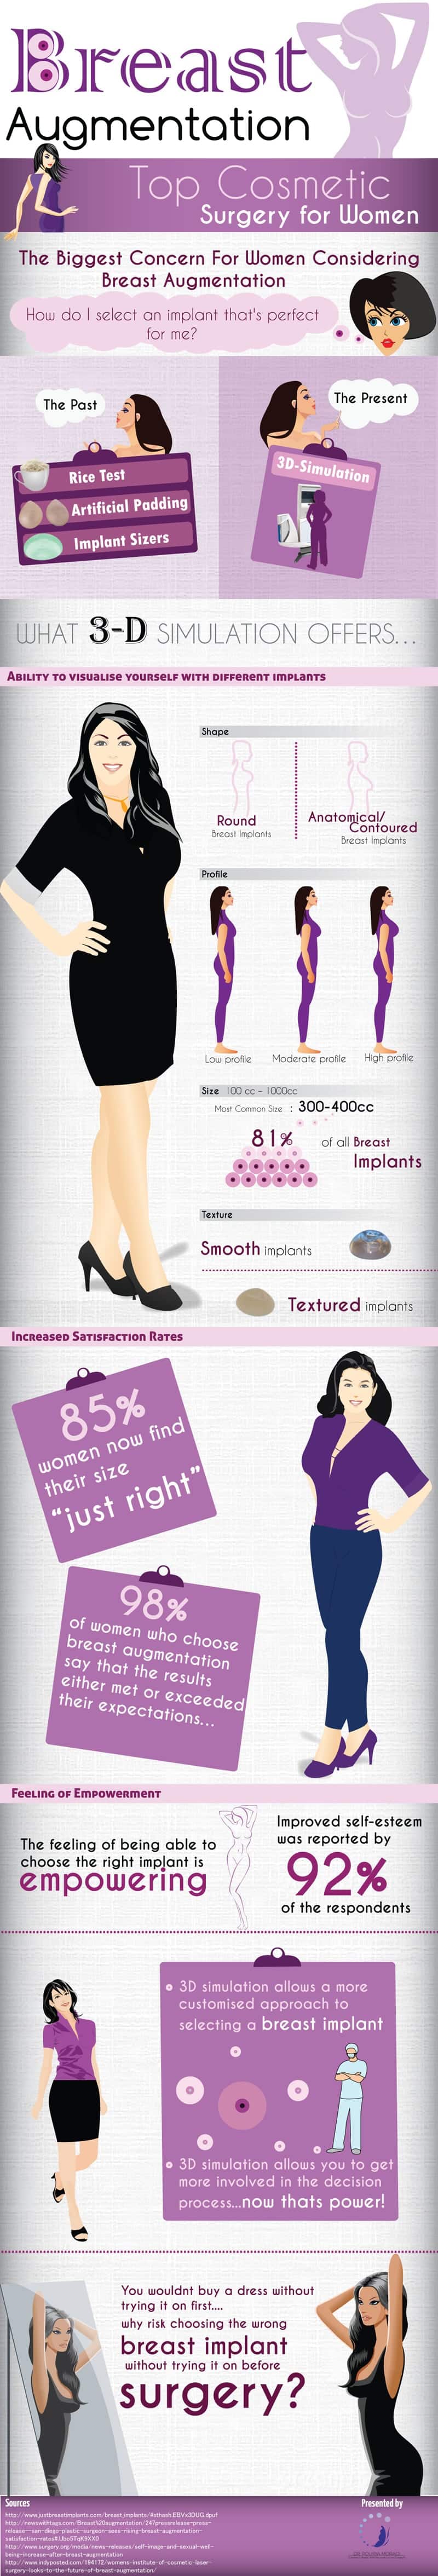 Breast-Augmentation-Infographic-websmate